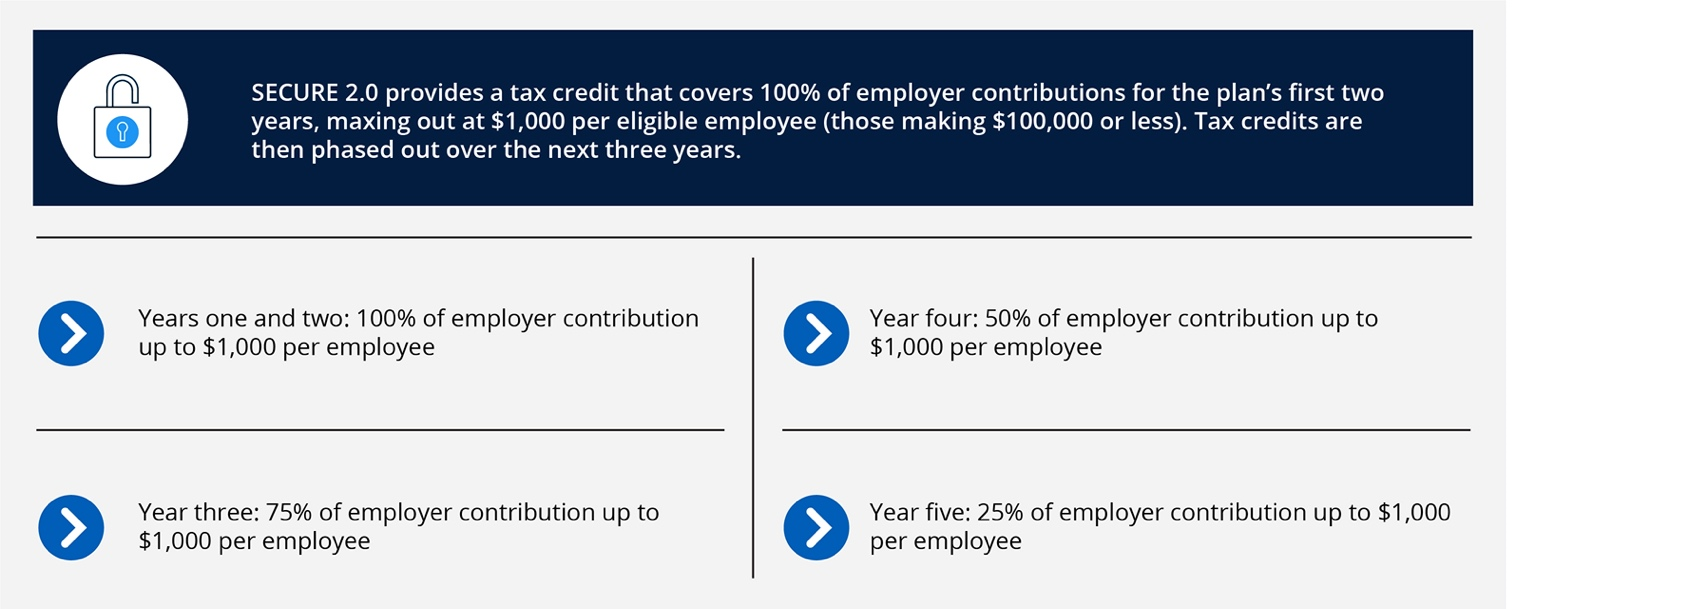 Chart: The SECURE 2.0 tax credit matches up to $1,000 of employer contributions per eligible employee for five years, with a decreasing percentage match over the last three years.